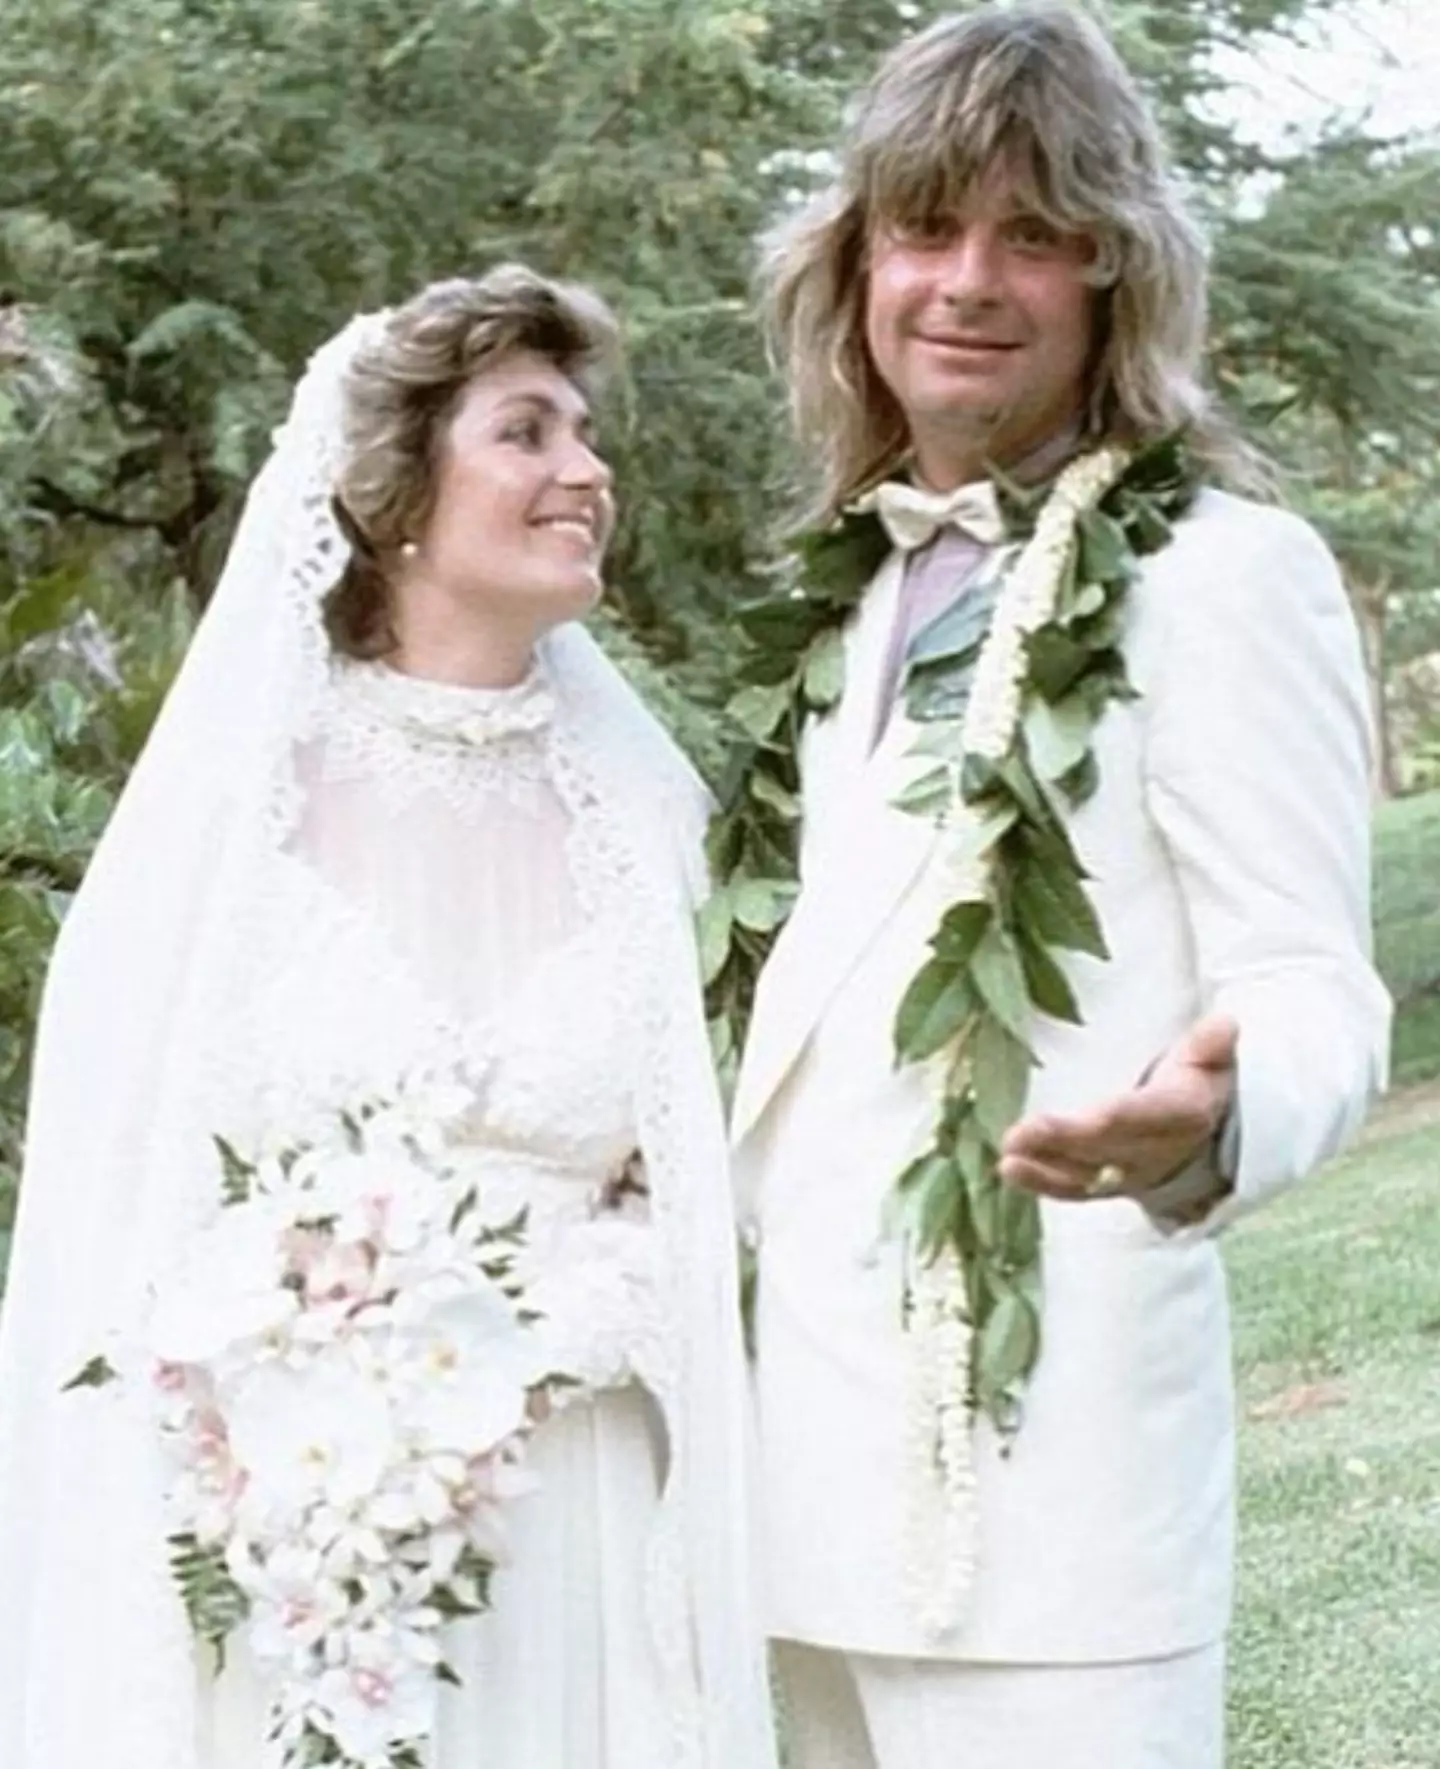 The pair tied the knot in 1982.